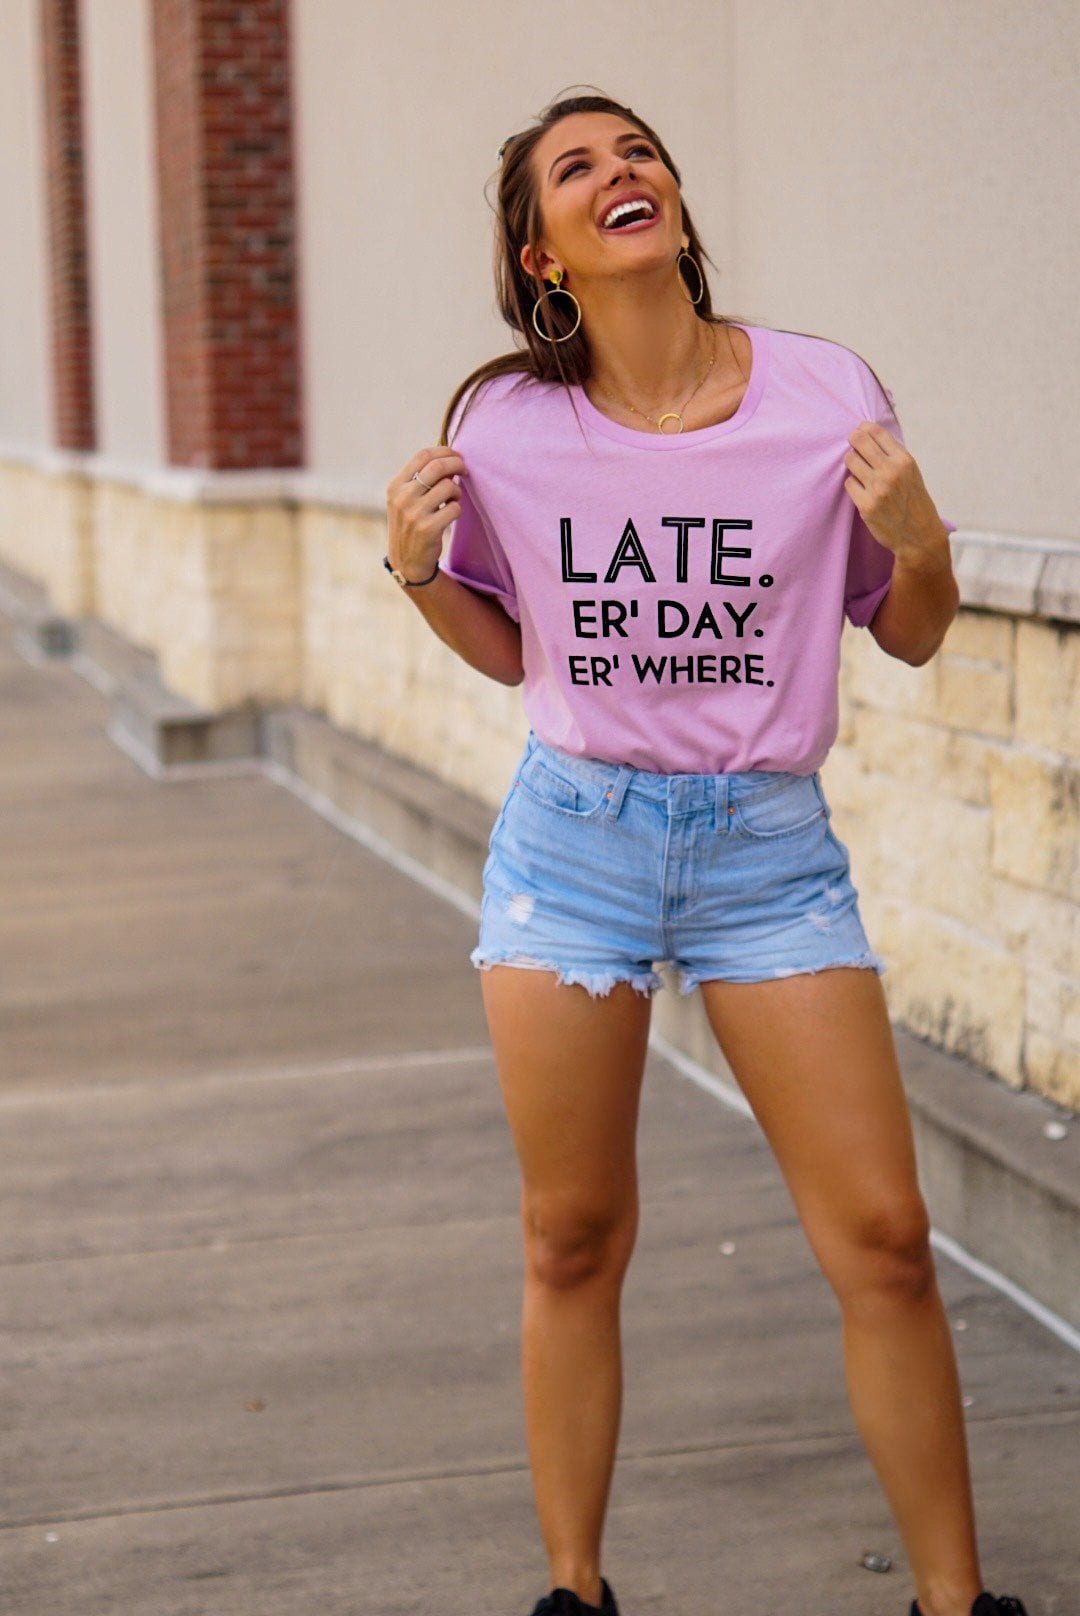 Er' Day Graphic Tee graphic tees Mark tee 